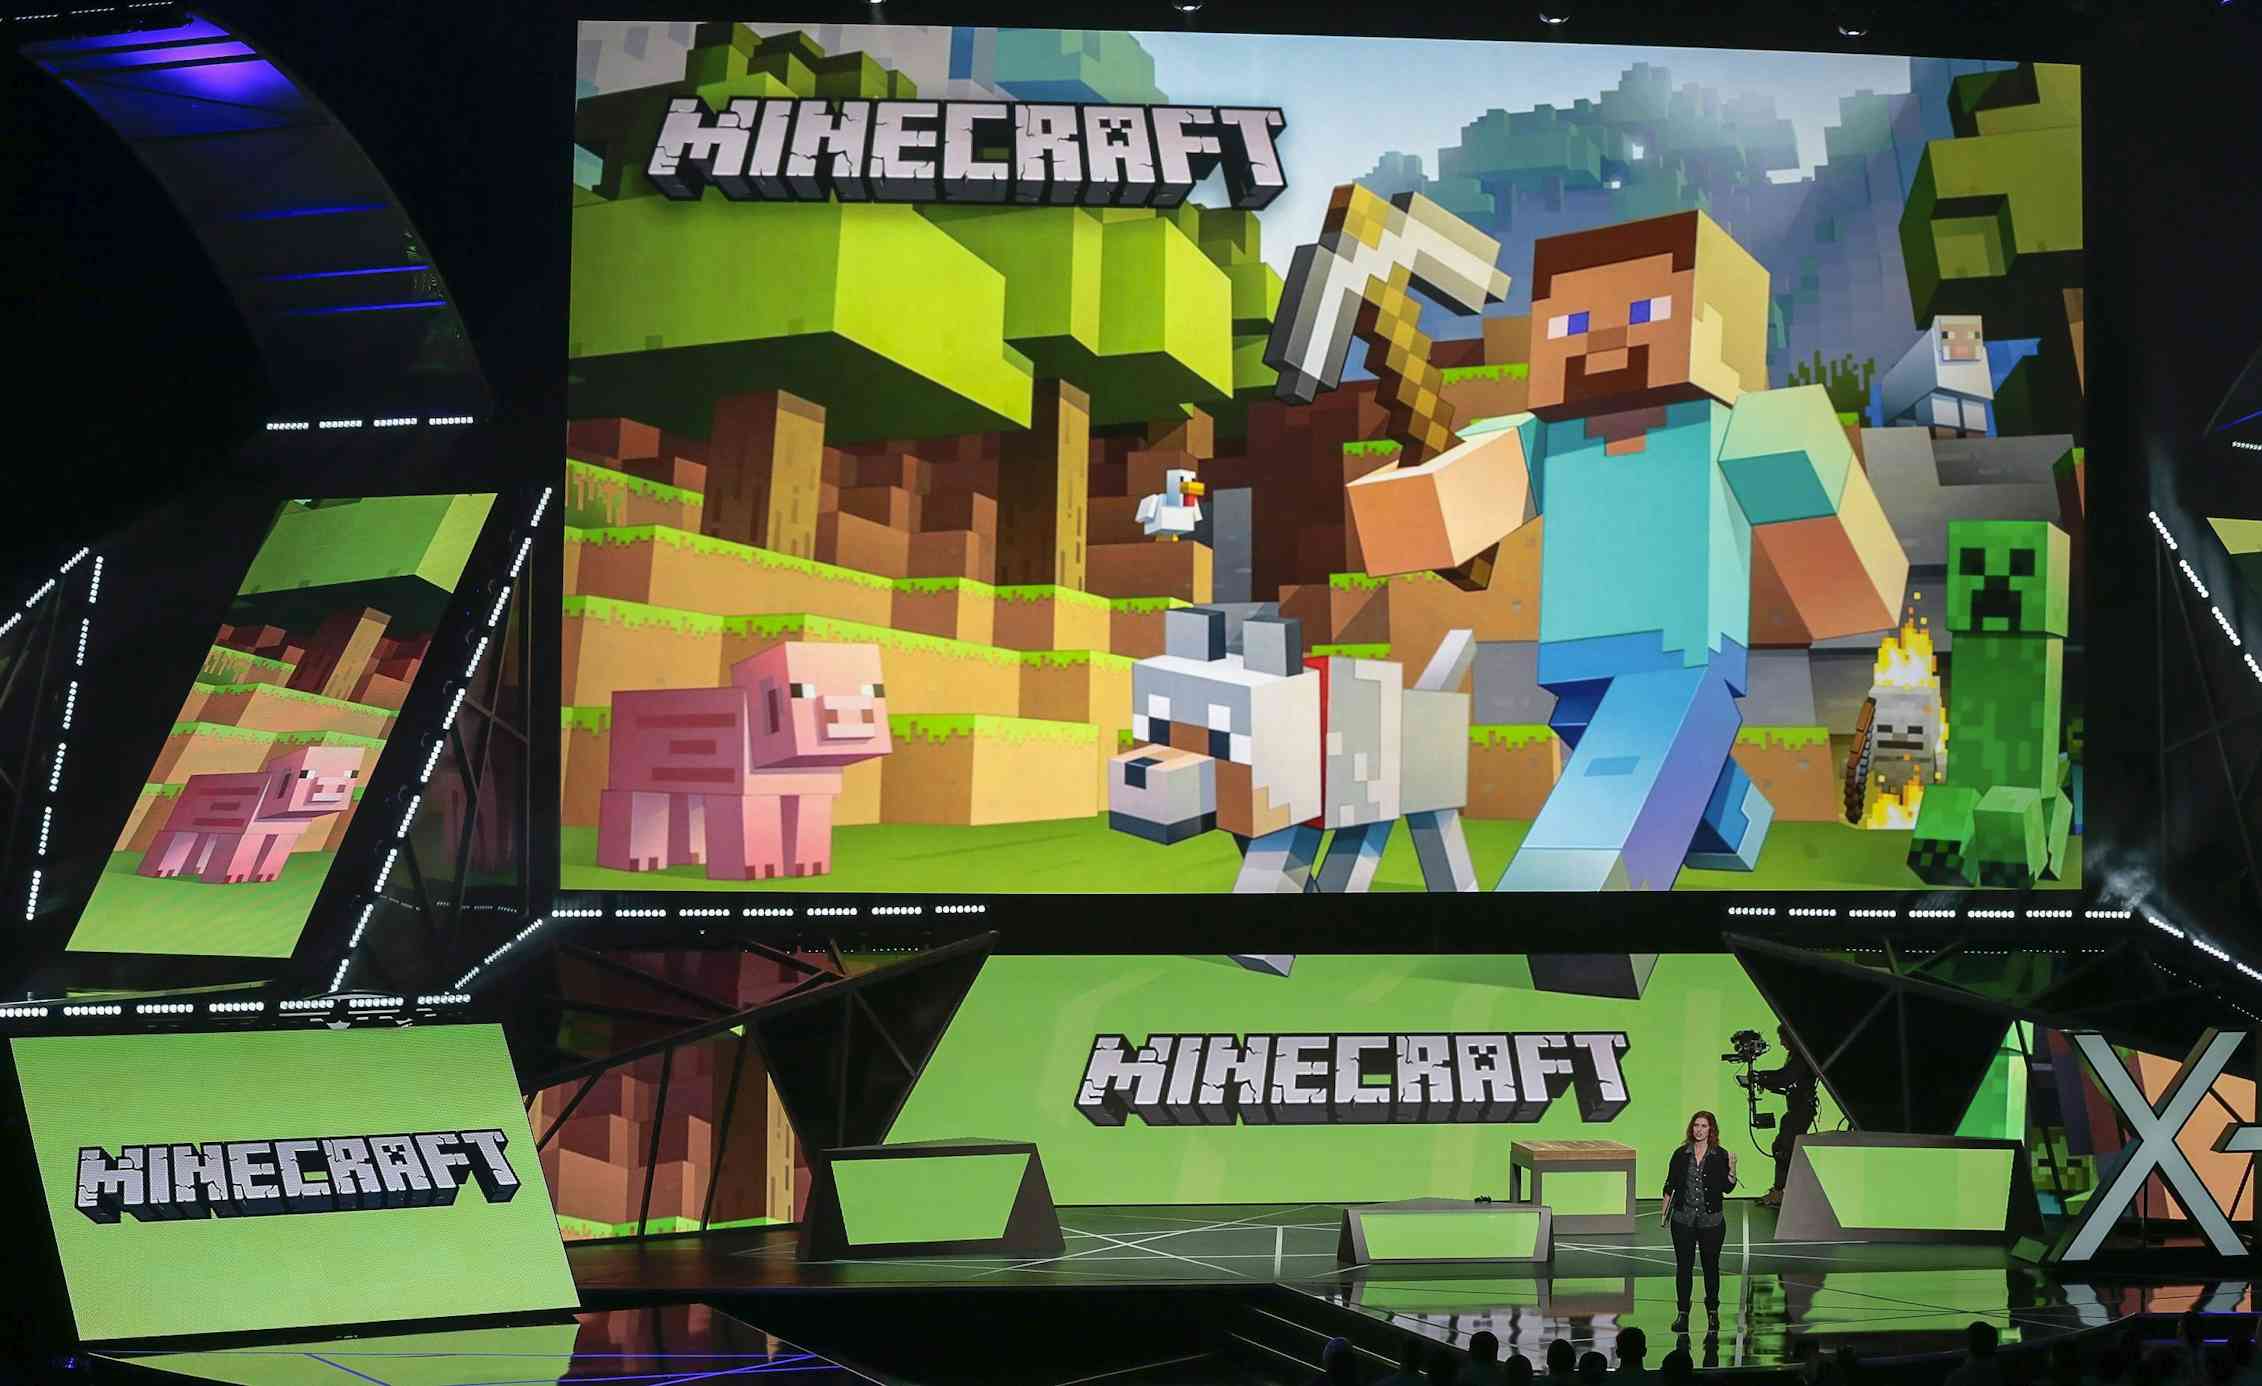 A photo showing minecraft figures.